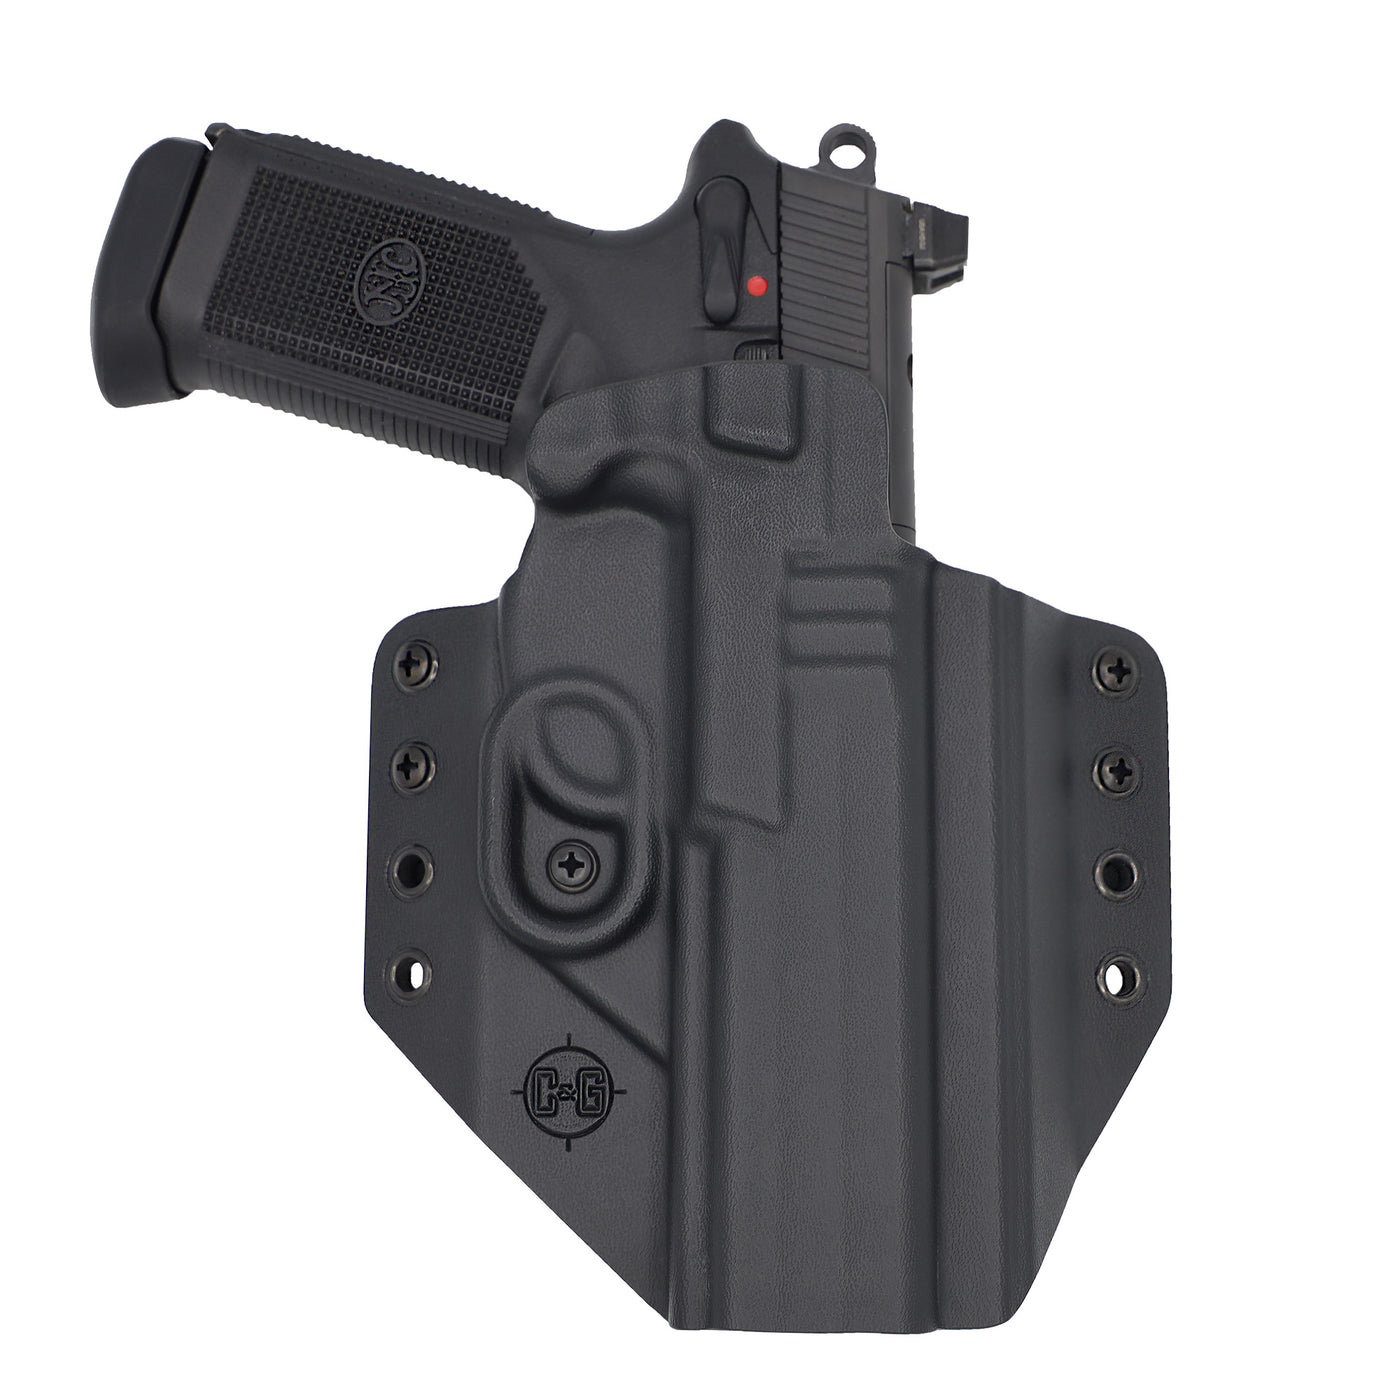 This is the C&G Holsters outside the waistband Covert series holster for the FNH FNX45T with the gun